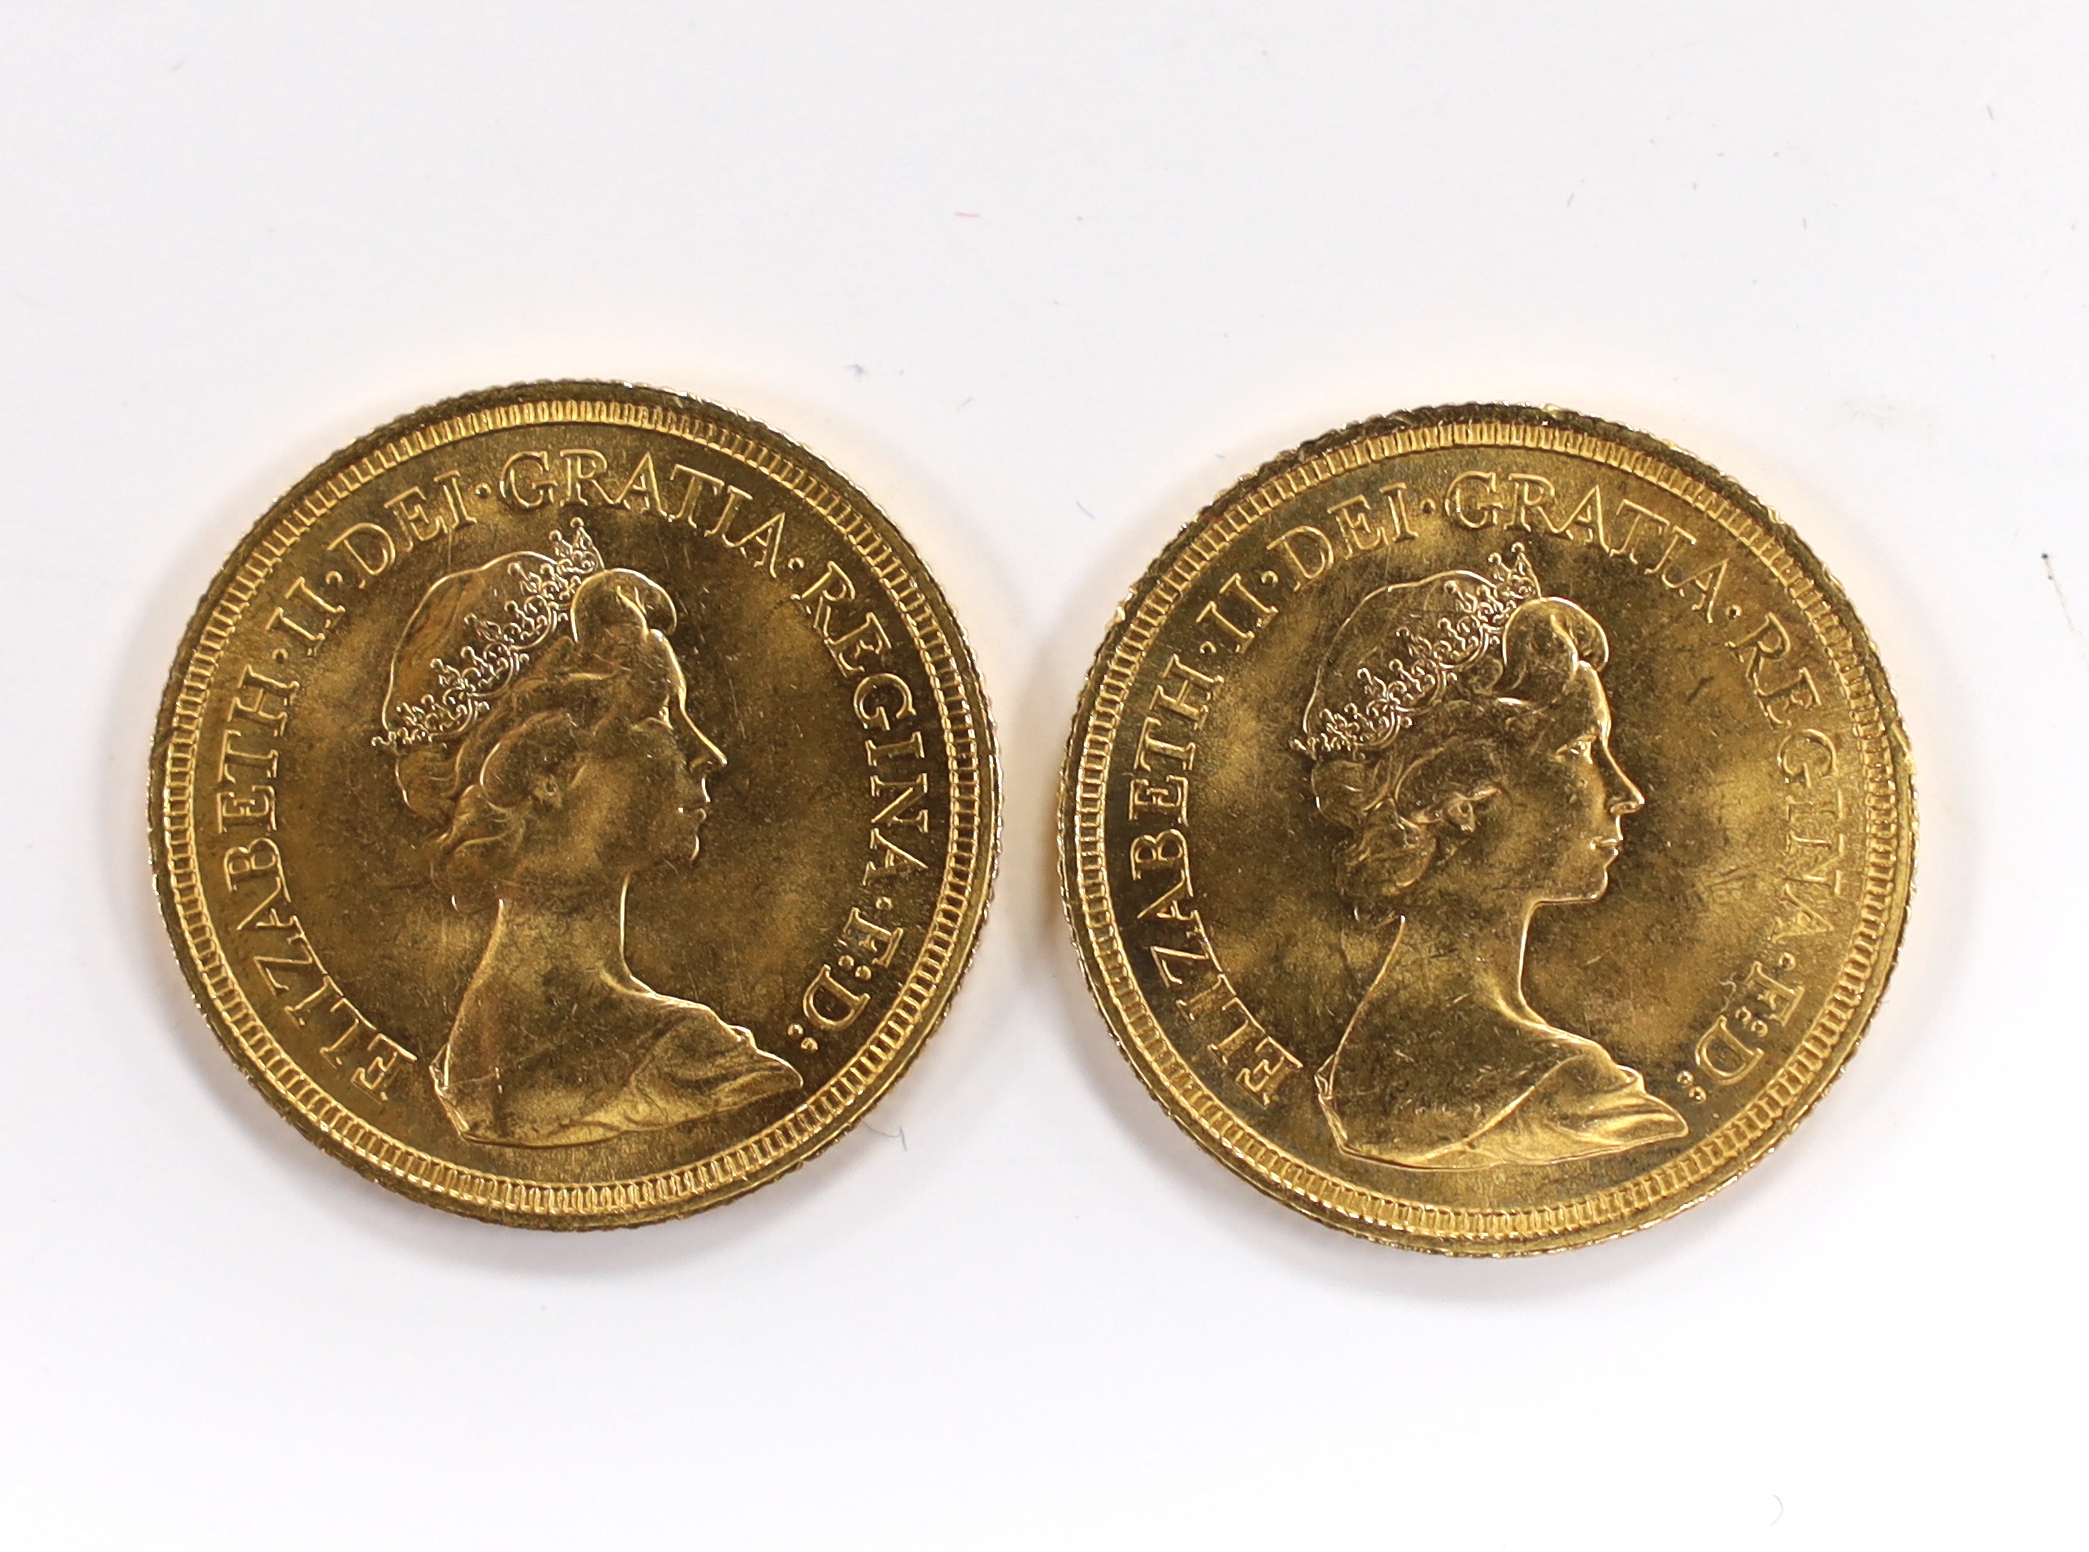 British gold coins - Two QEII gold sovereigns, 1974, about UNC, (S4204) - Image 2 of 2